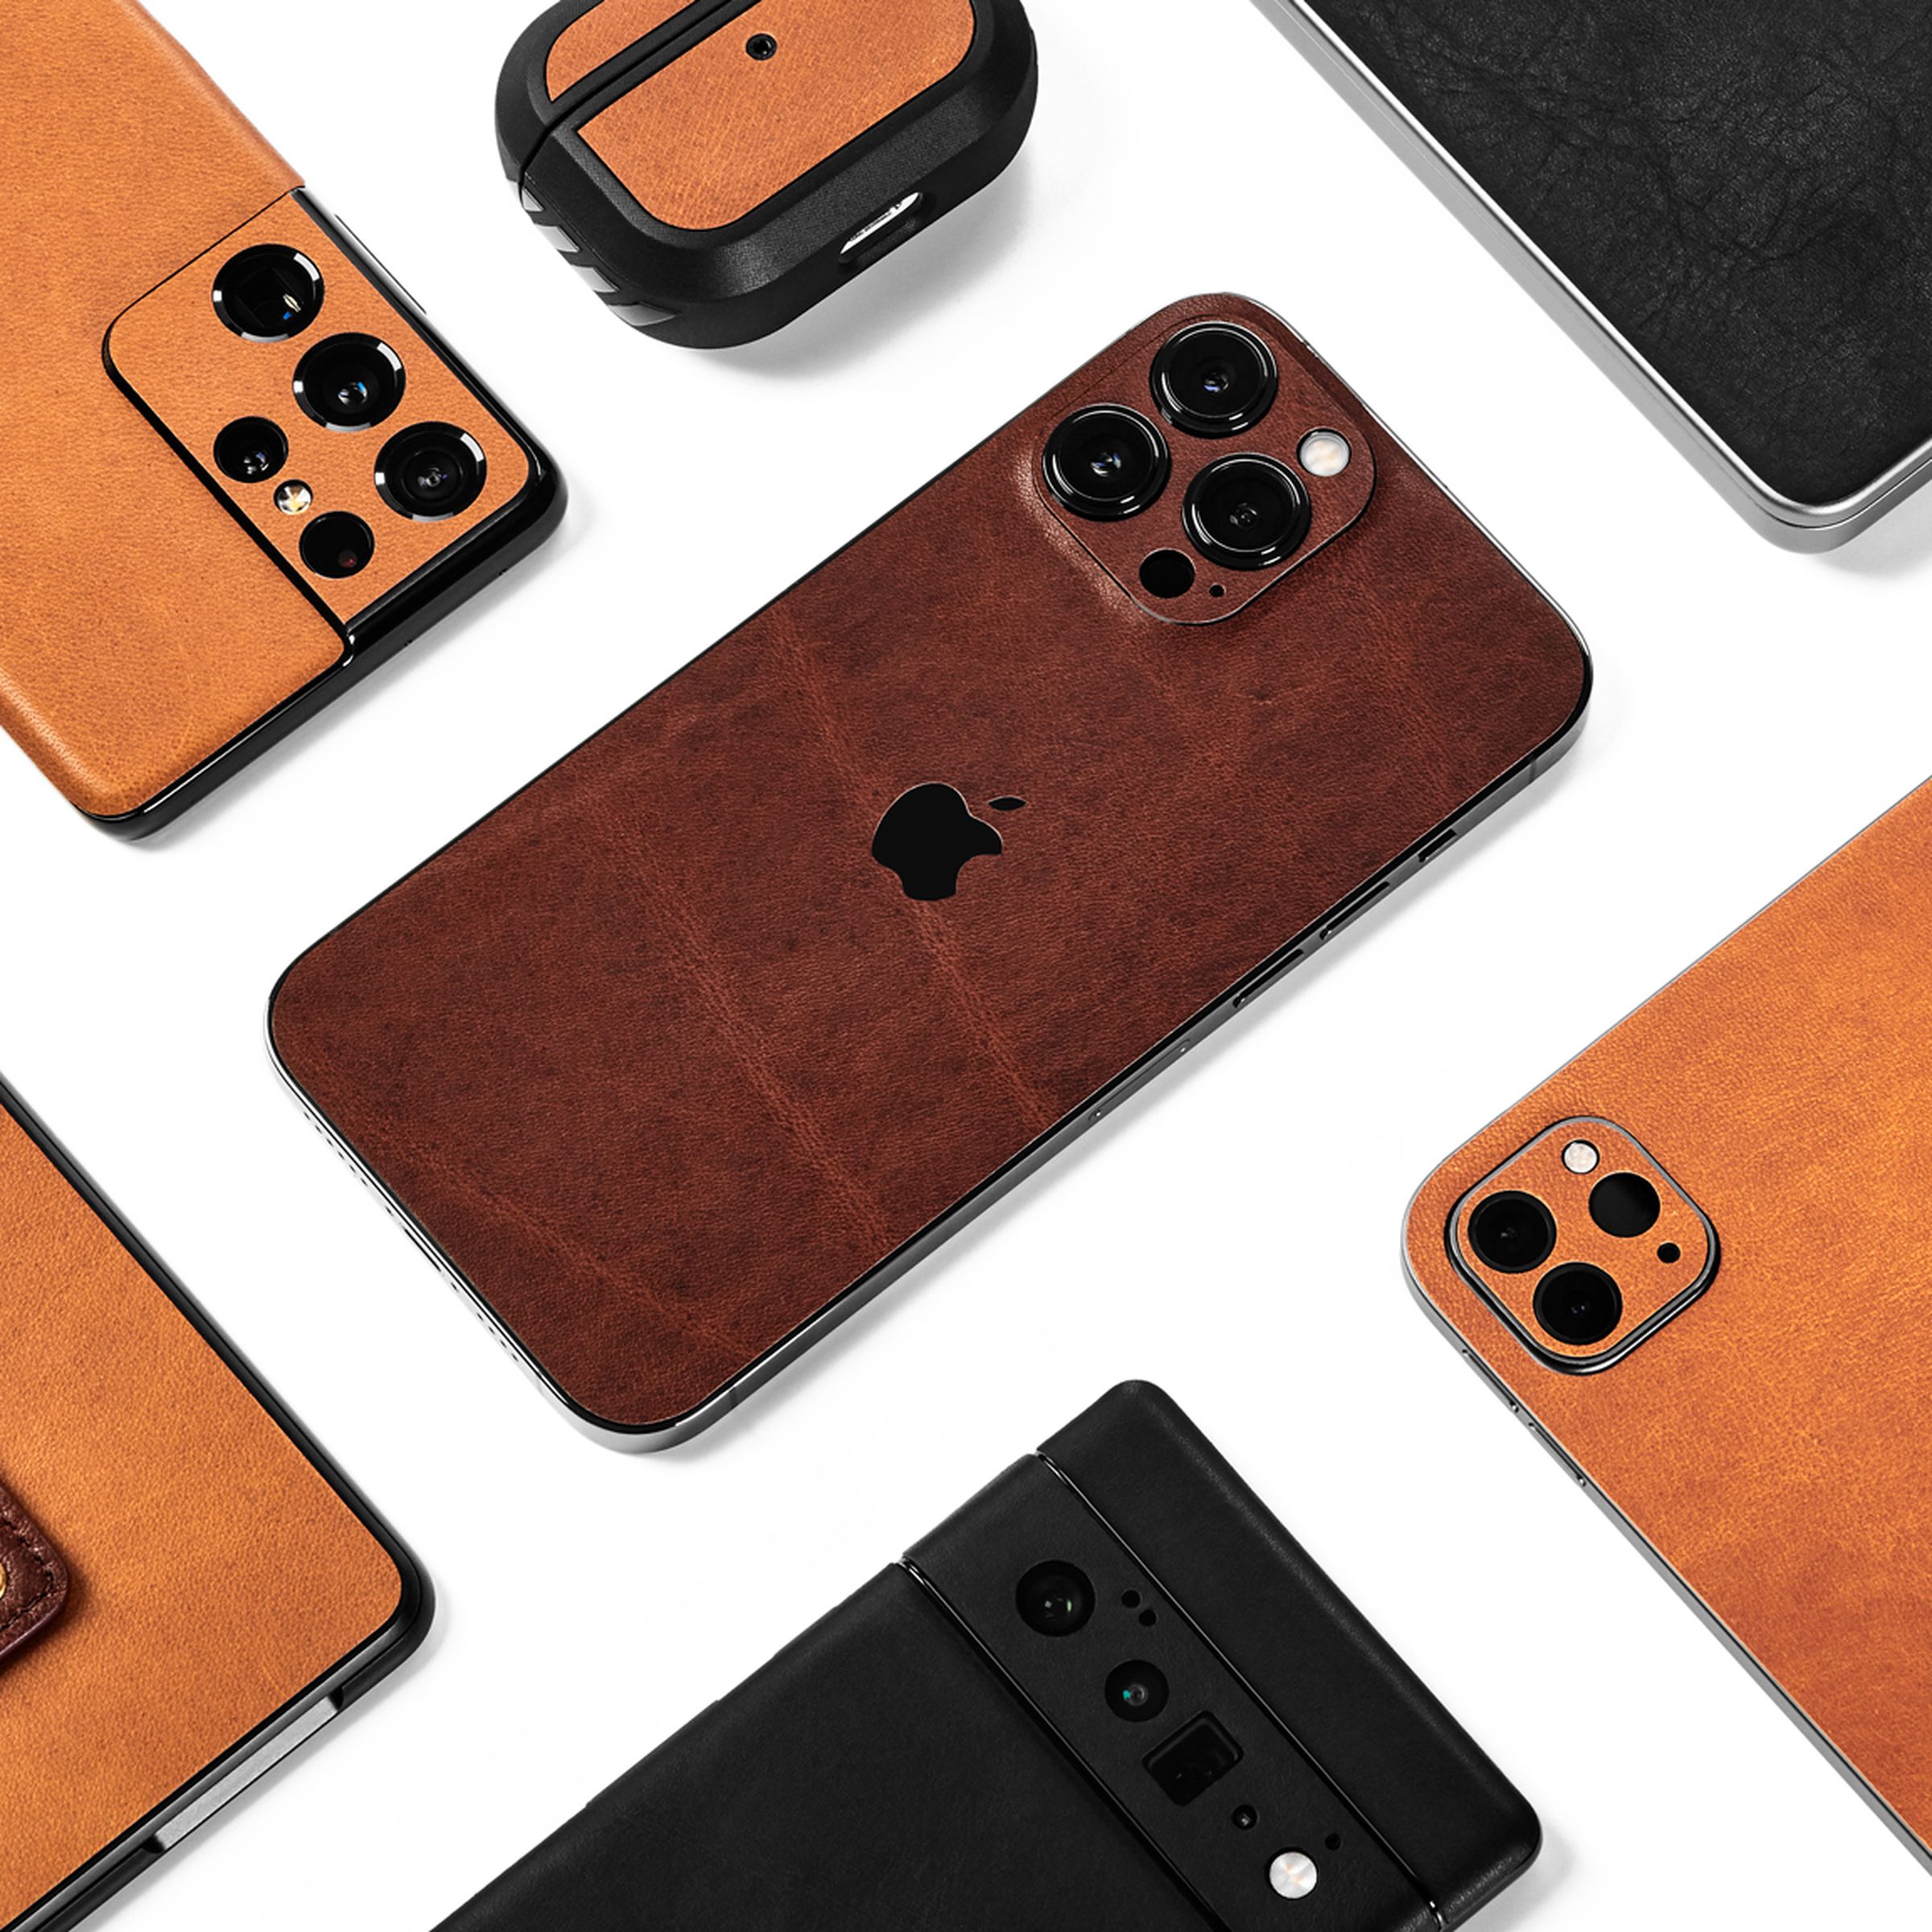 Dbrand’s leather collection of skins.